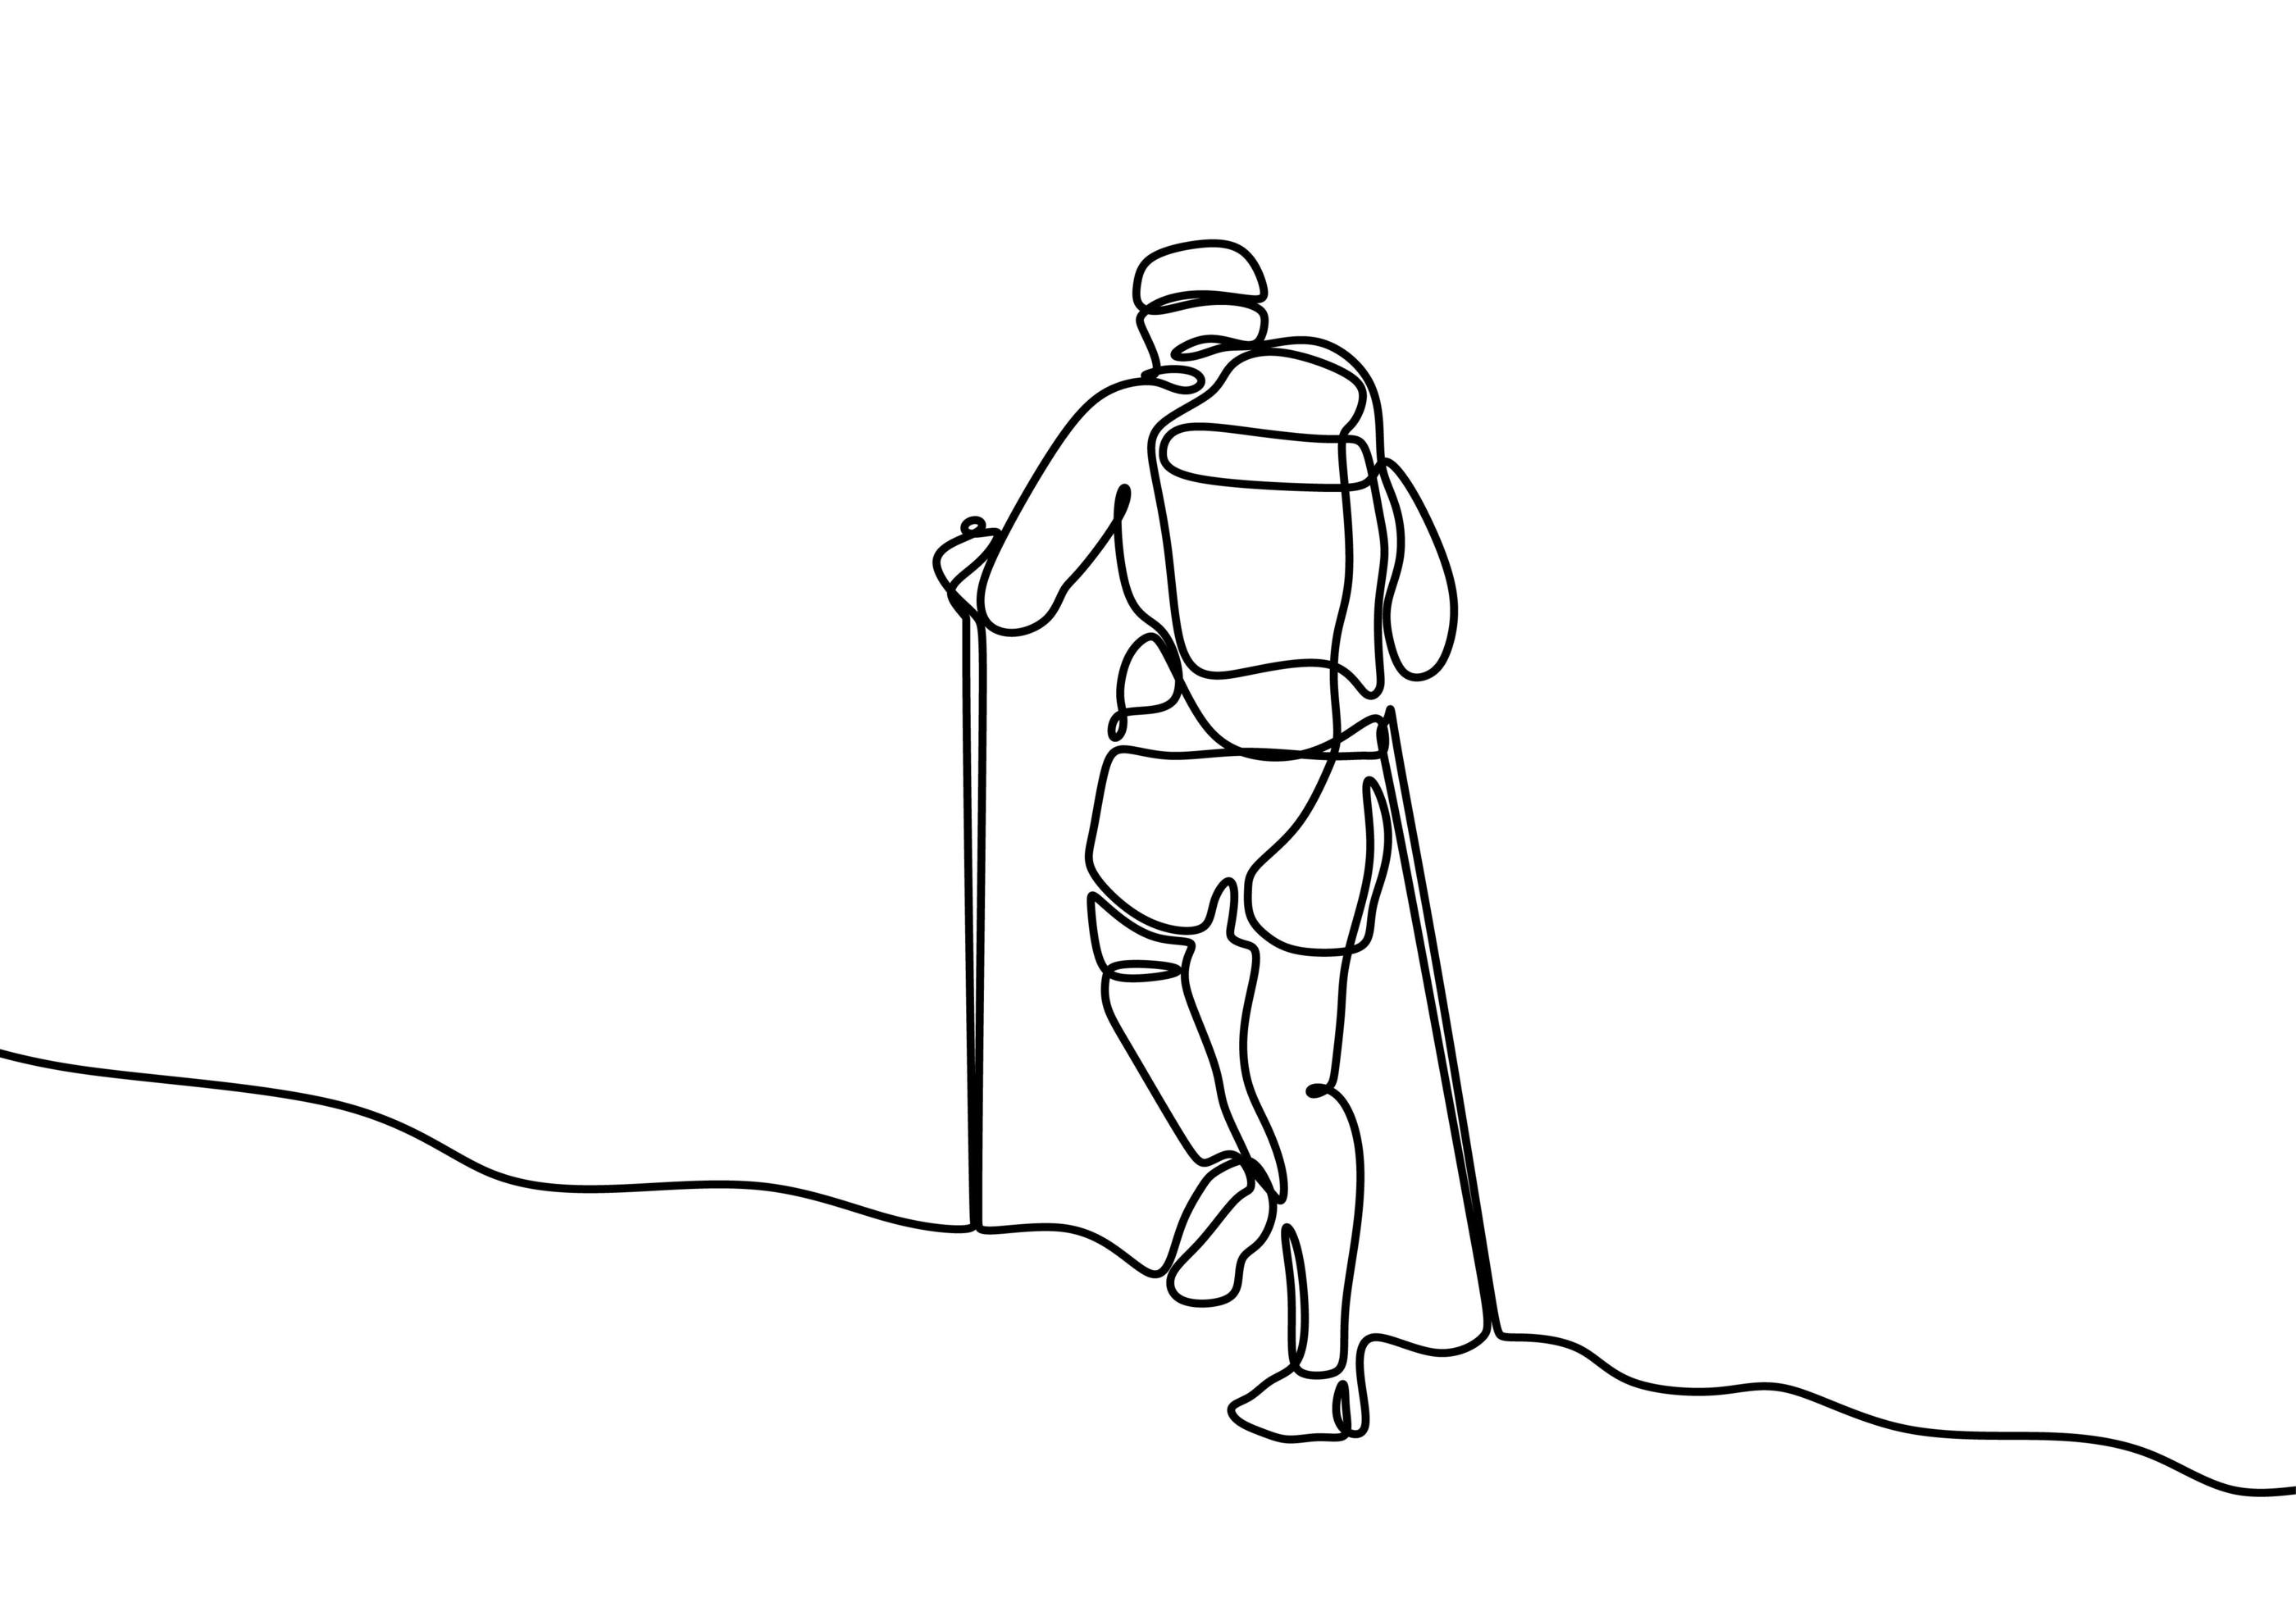 Top How To Draw A Hiker of the decade Learn more here 